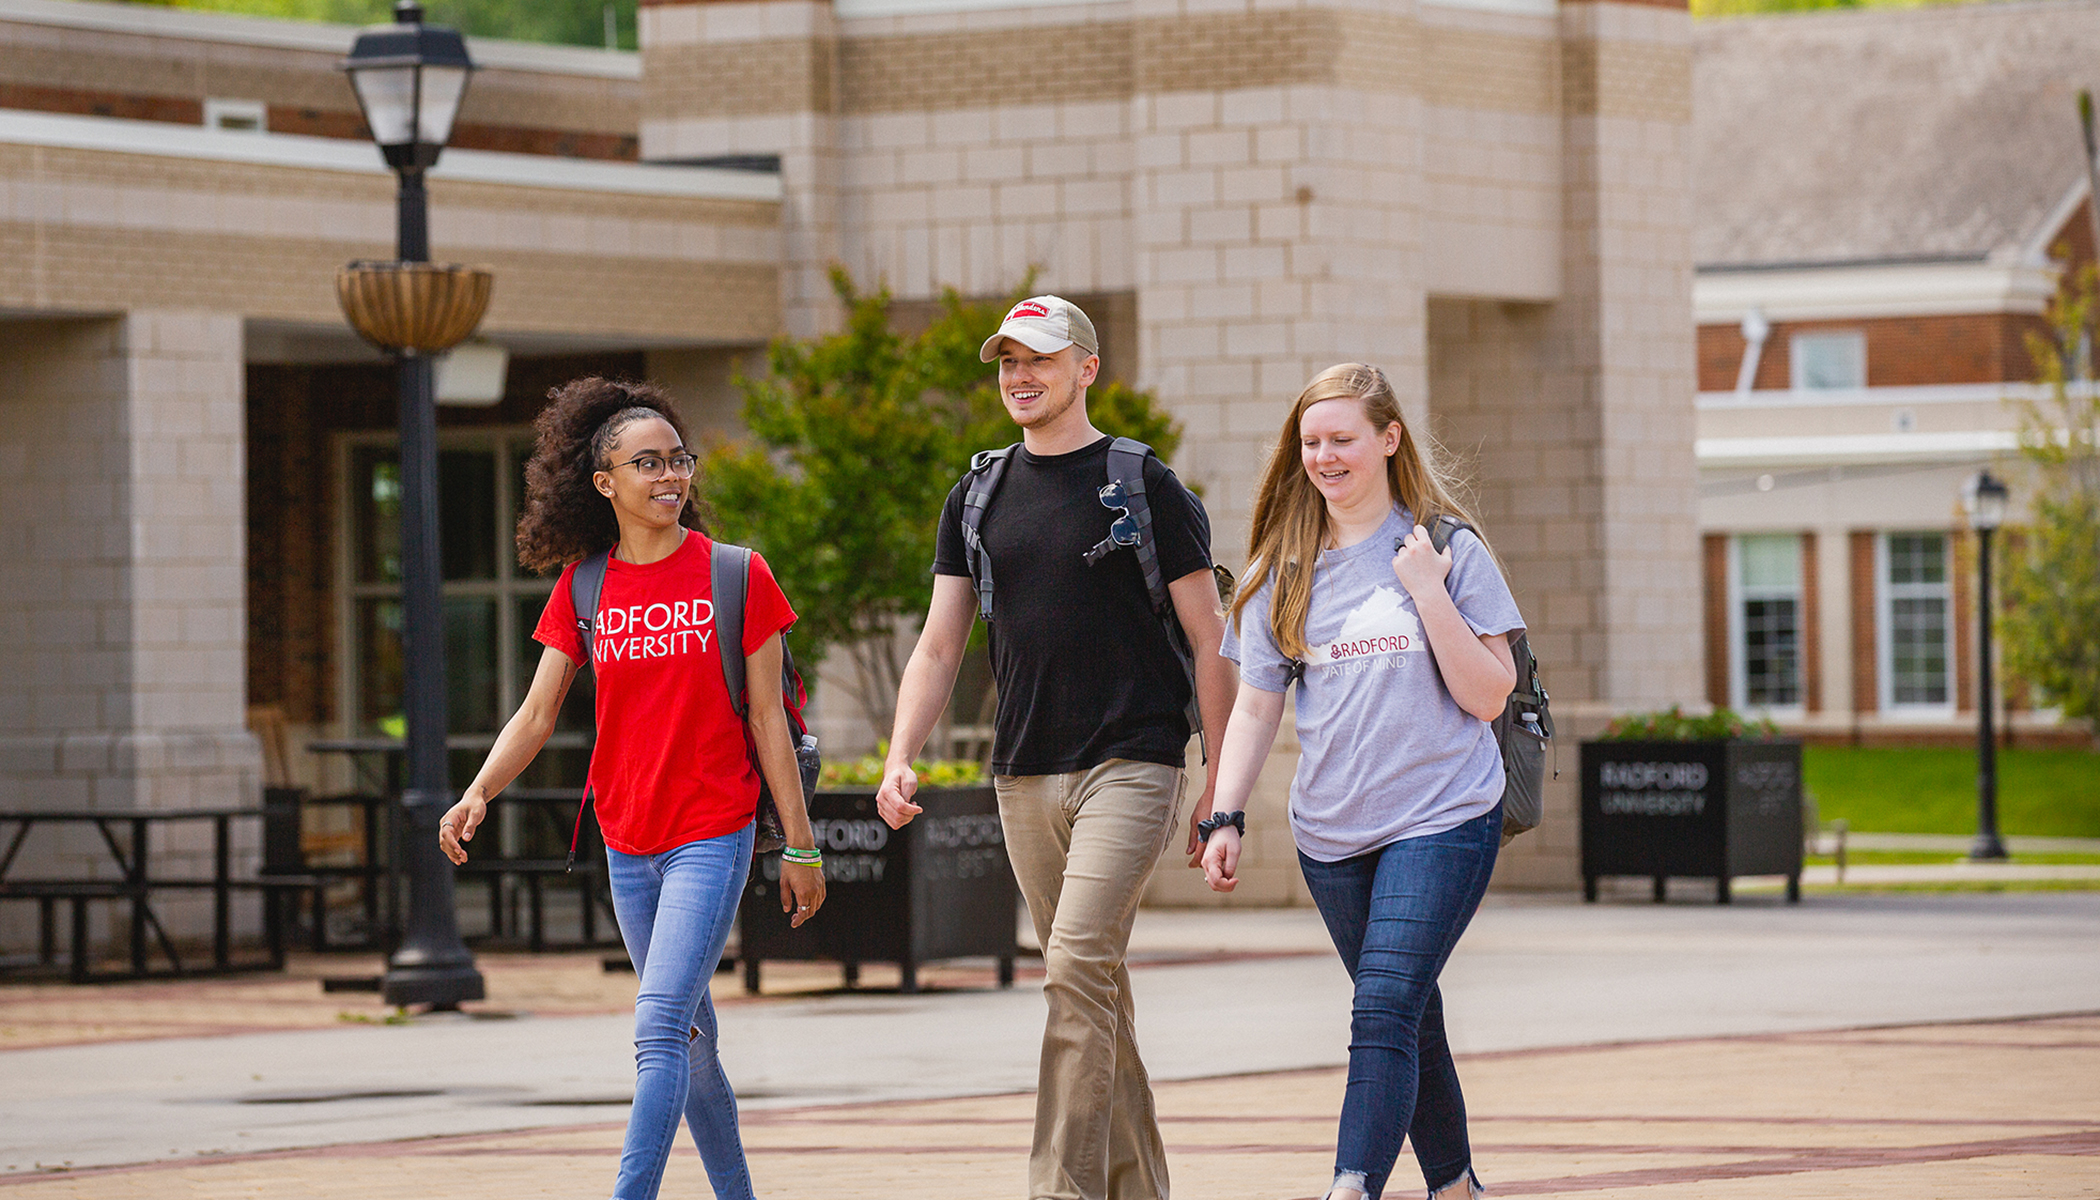 Students walking together across the Bonnie Plaza.